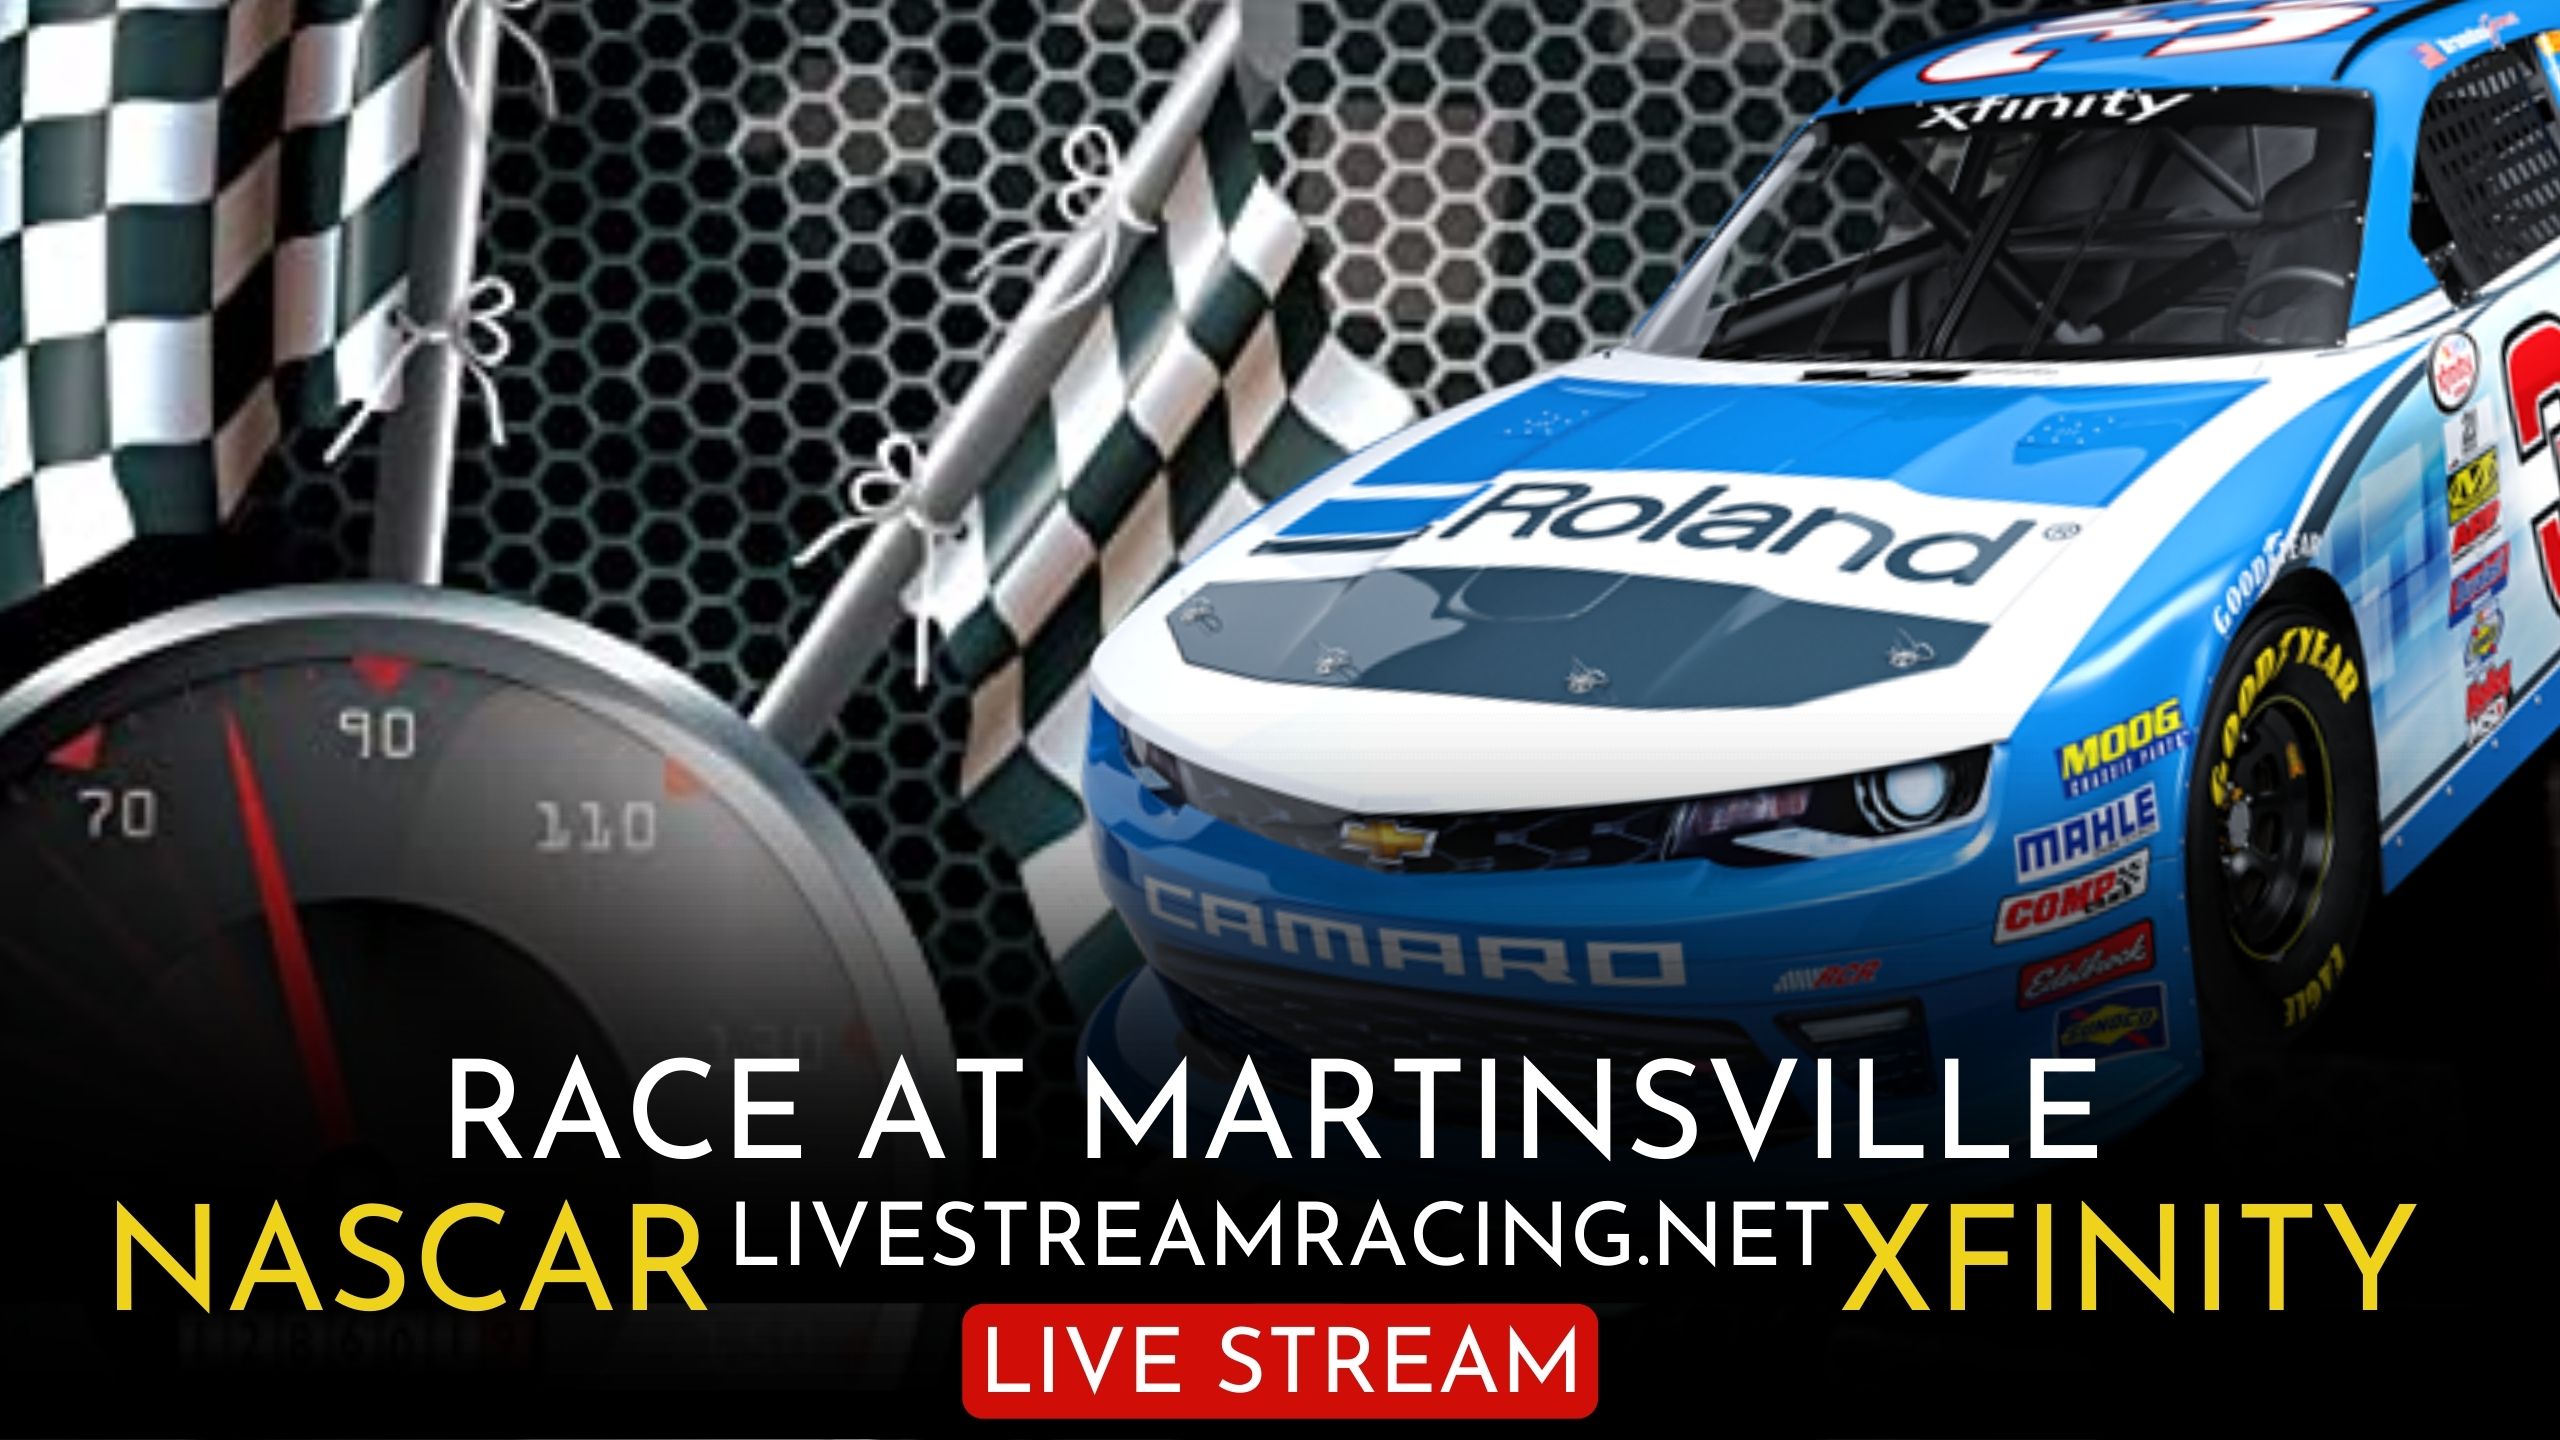 Playoff Race At Martinsville Nascar Live Stream 2022 | Xfinity Series